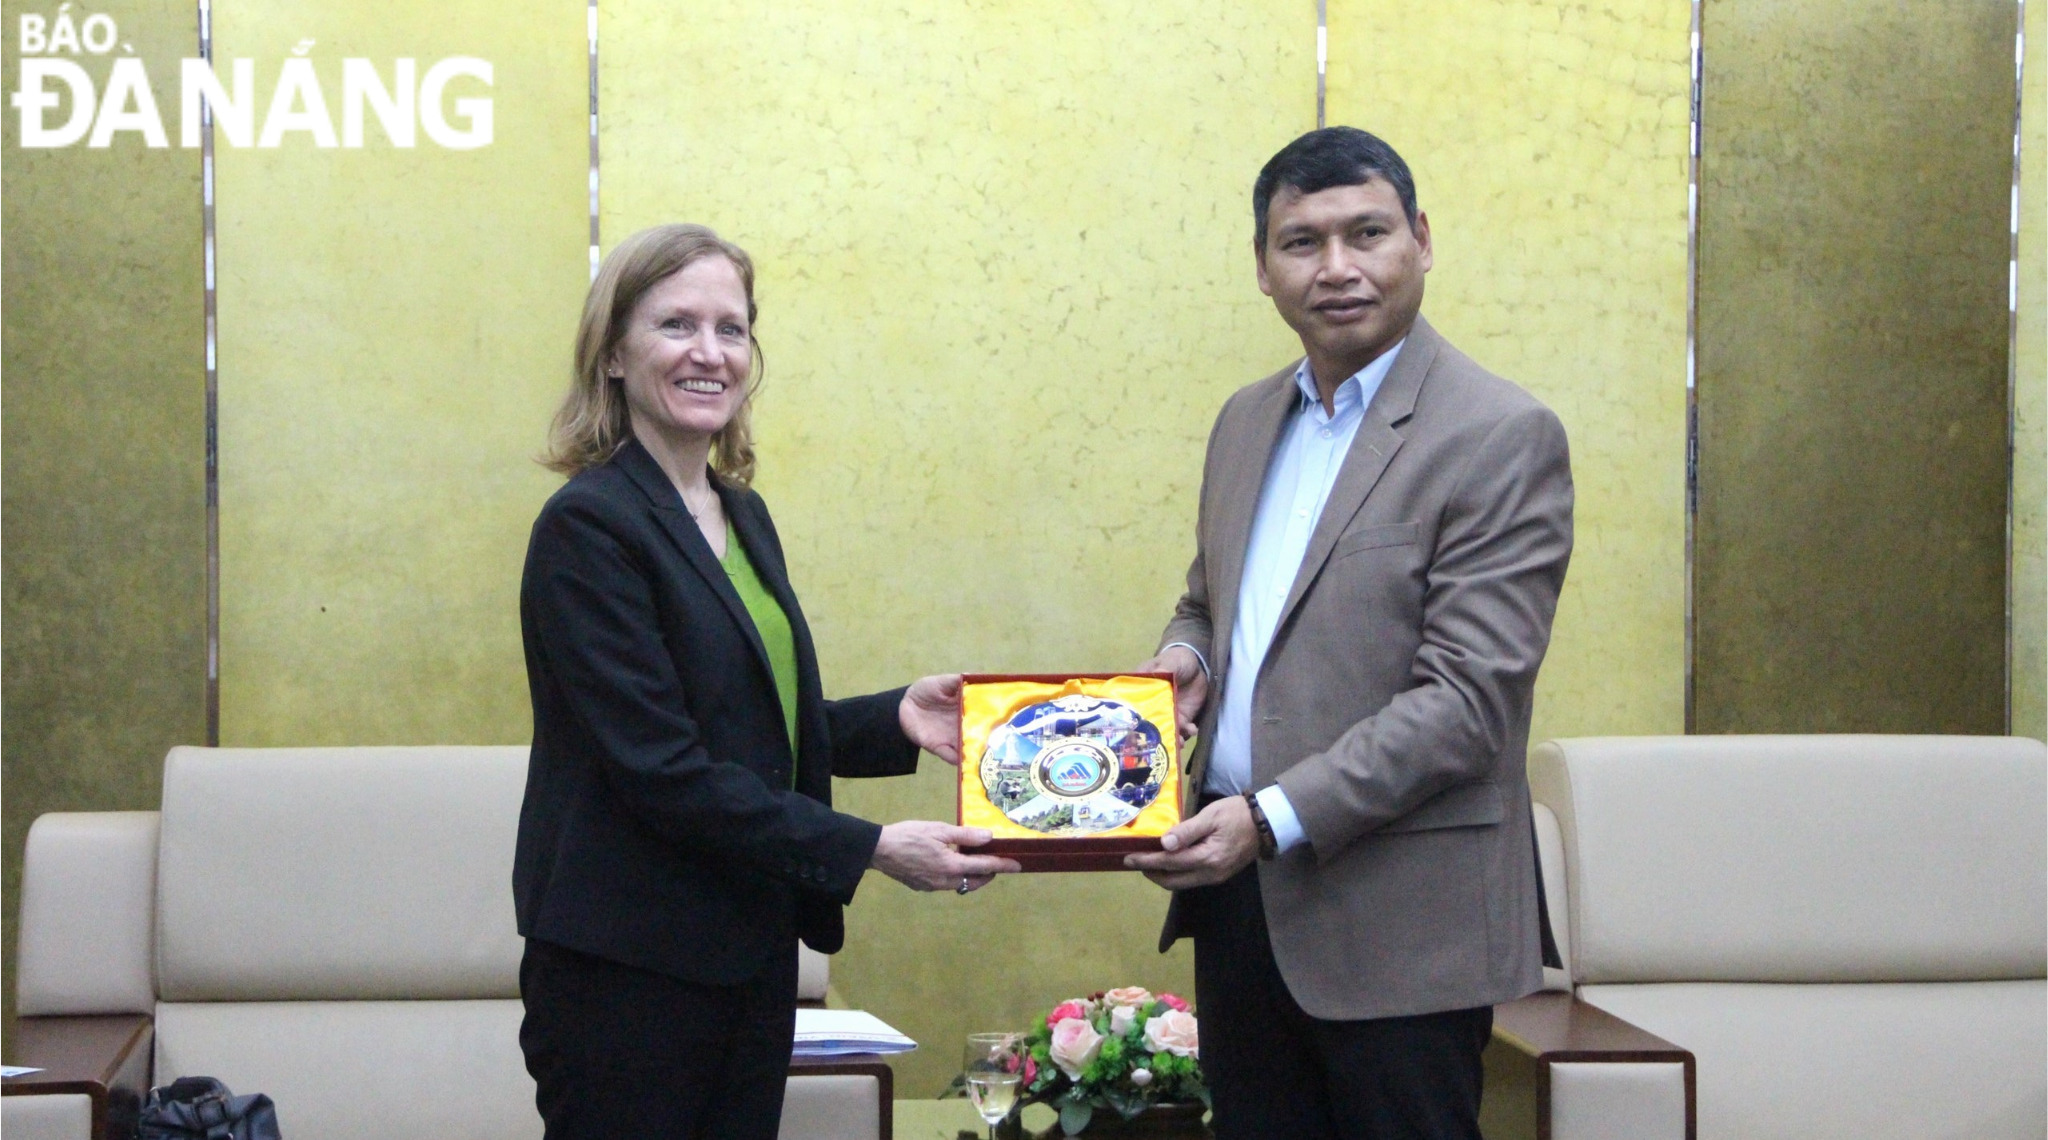 Da Nang People's Committee Vice Chairman Ho Ky Minh (right) presenting a souvenir to the new Director of USAID in Viet Nam Aler Grubbs. Photo: T.PHUONG